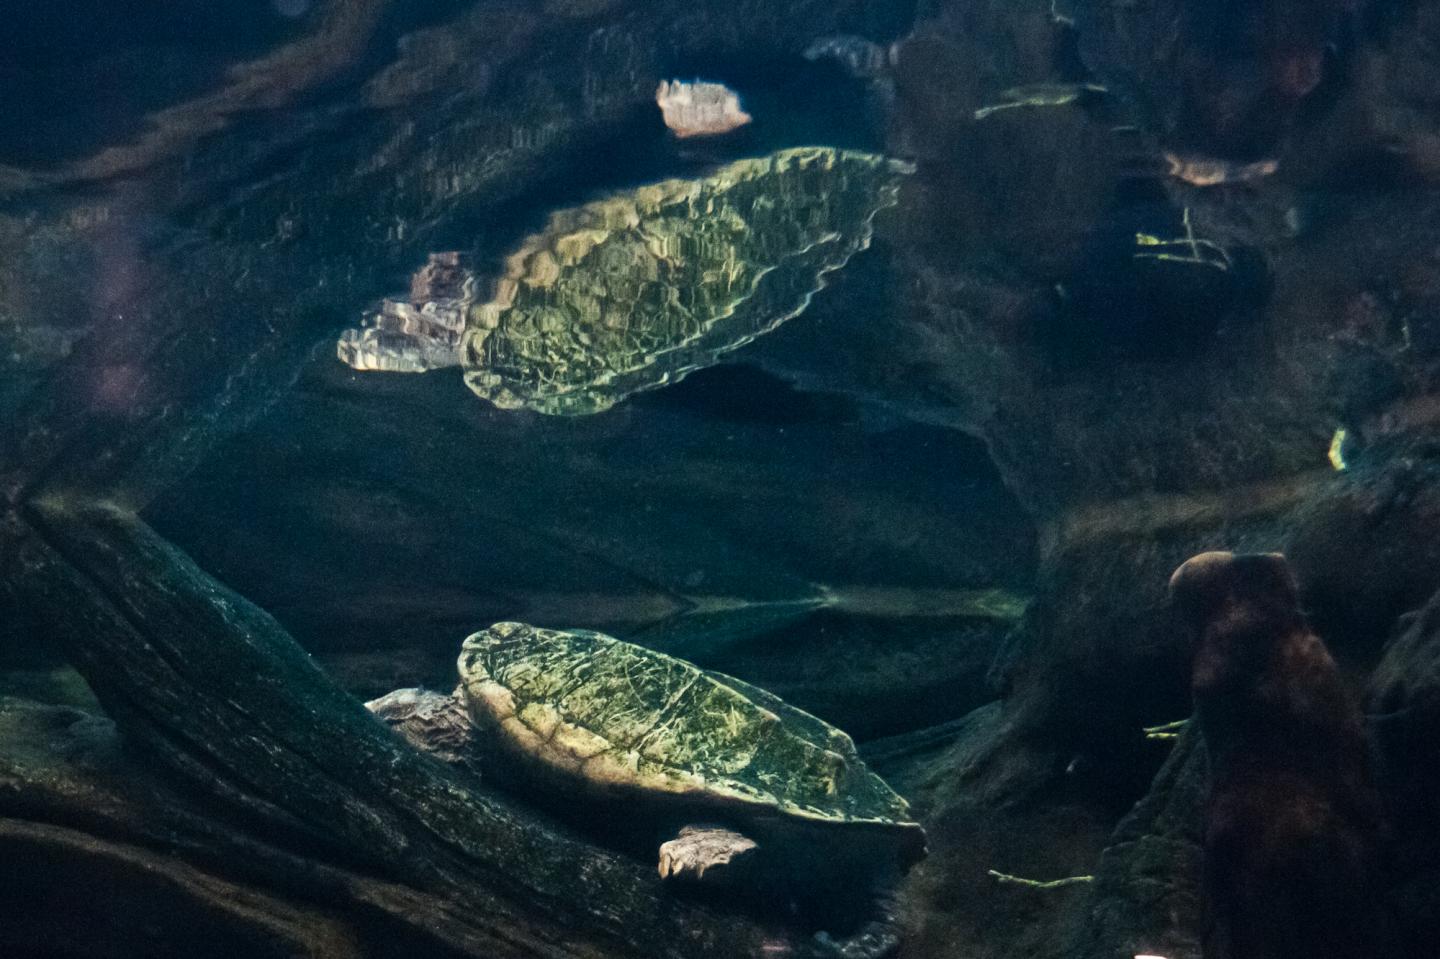 Turtle (2 of 2)